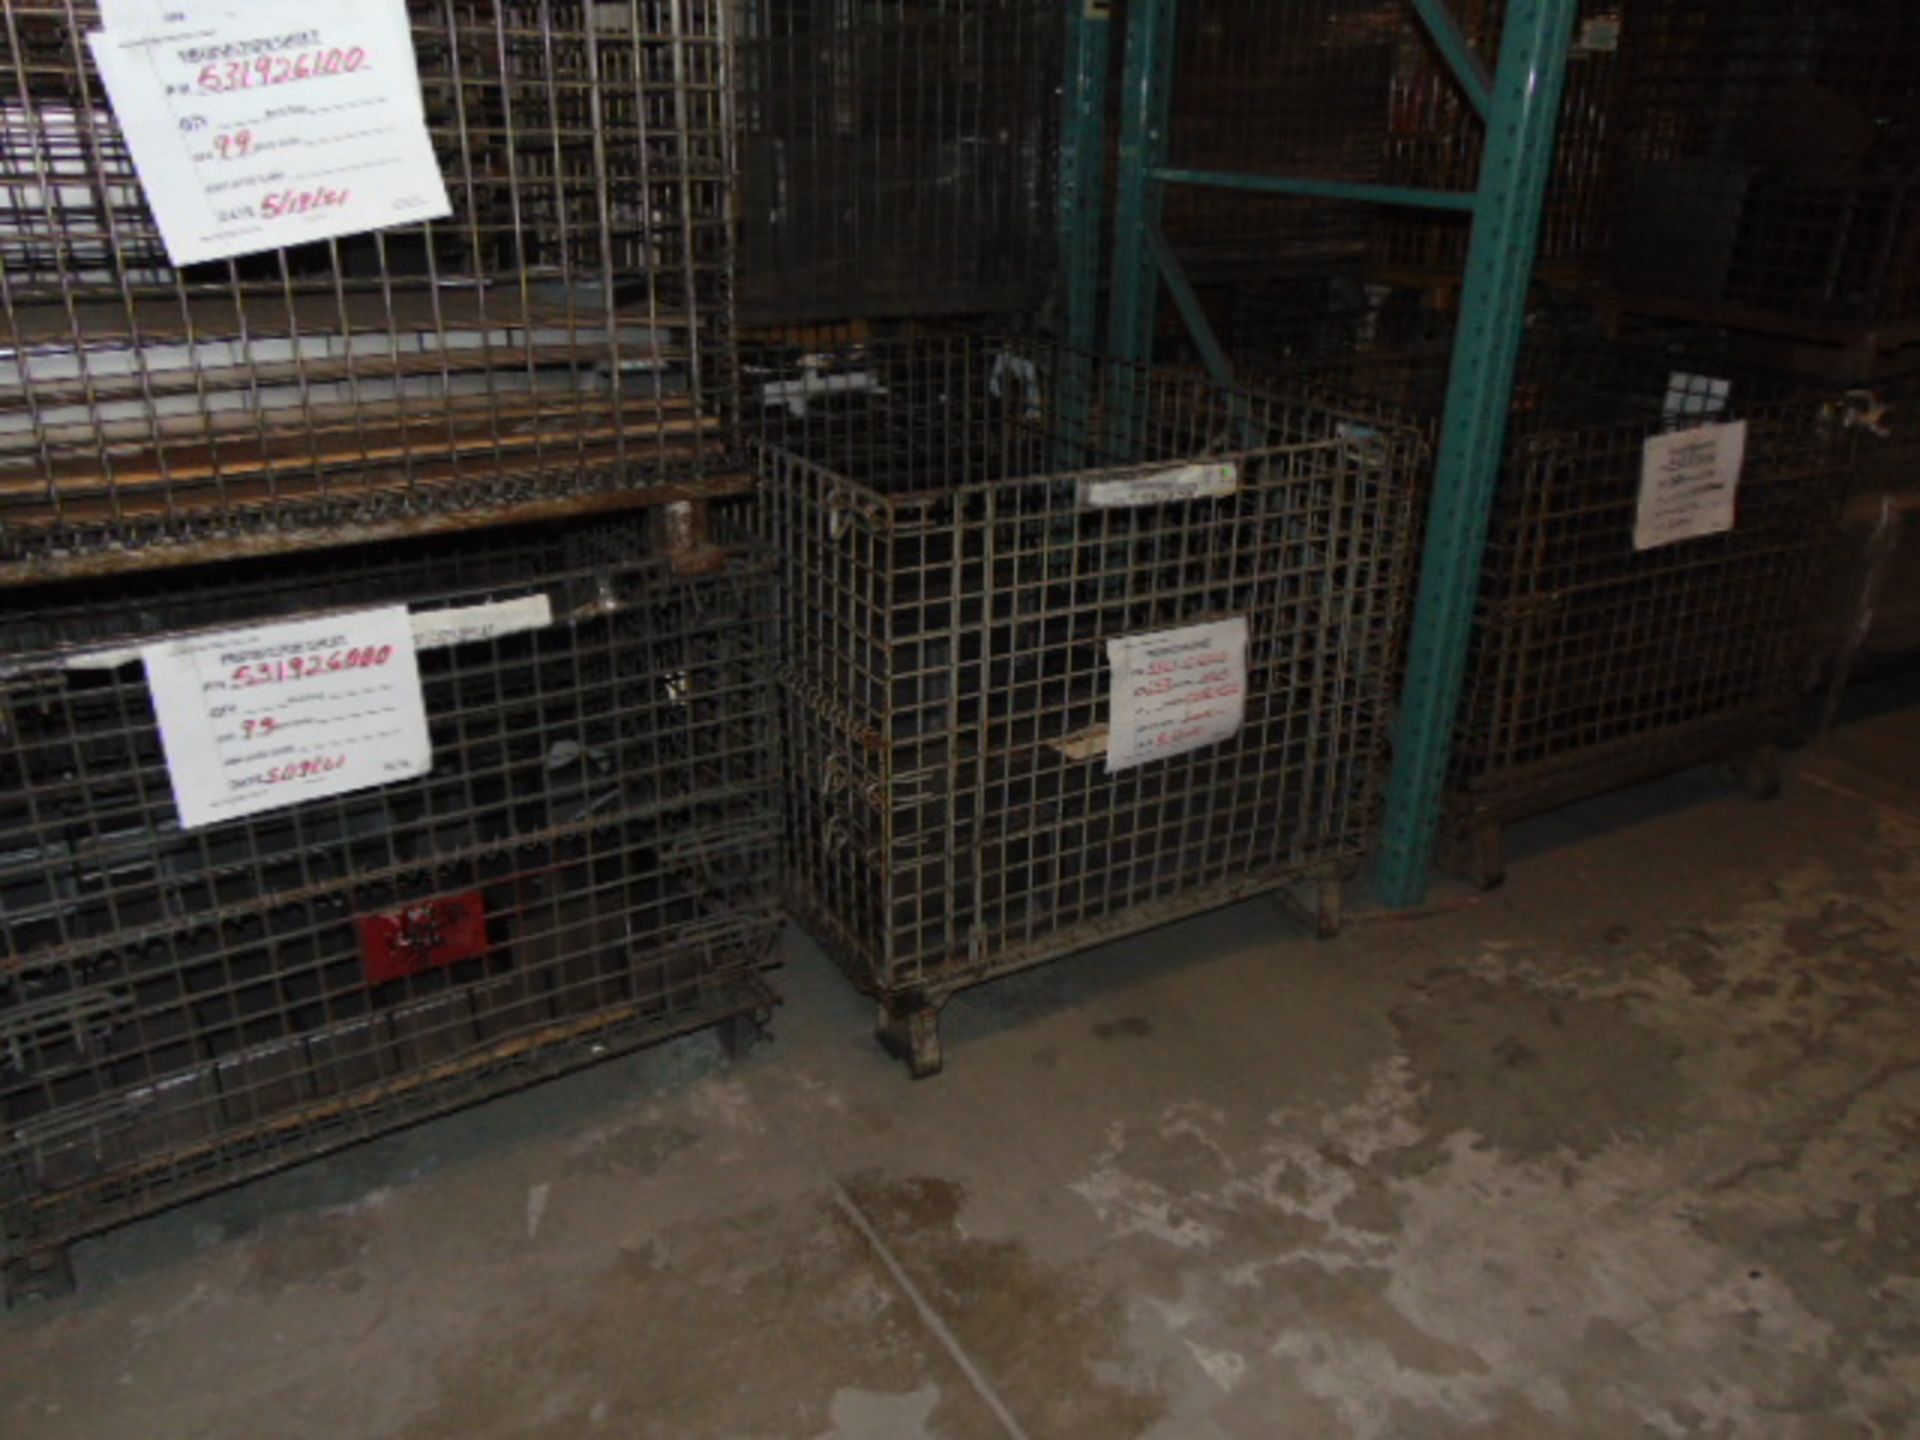 LOT CONSISTING OF: assorted steel in process parts, wire baskets & cardboard (no dies or racks) ( - Image 26 of 39